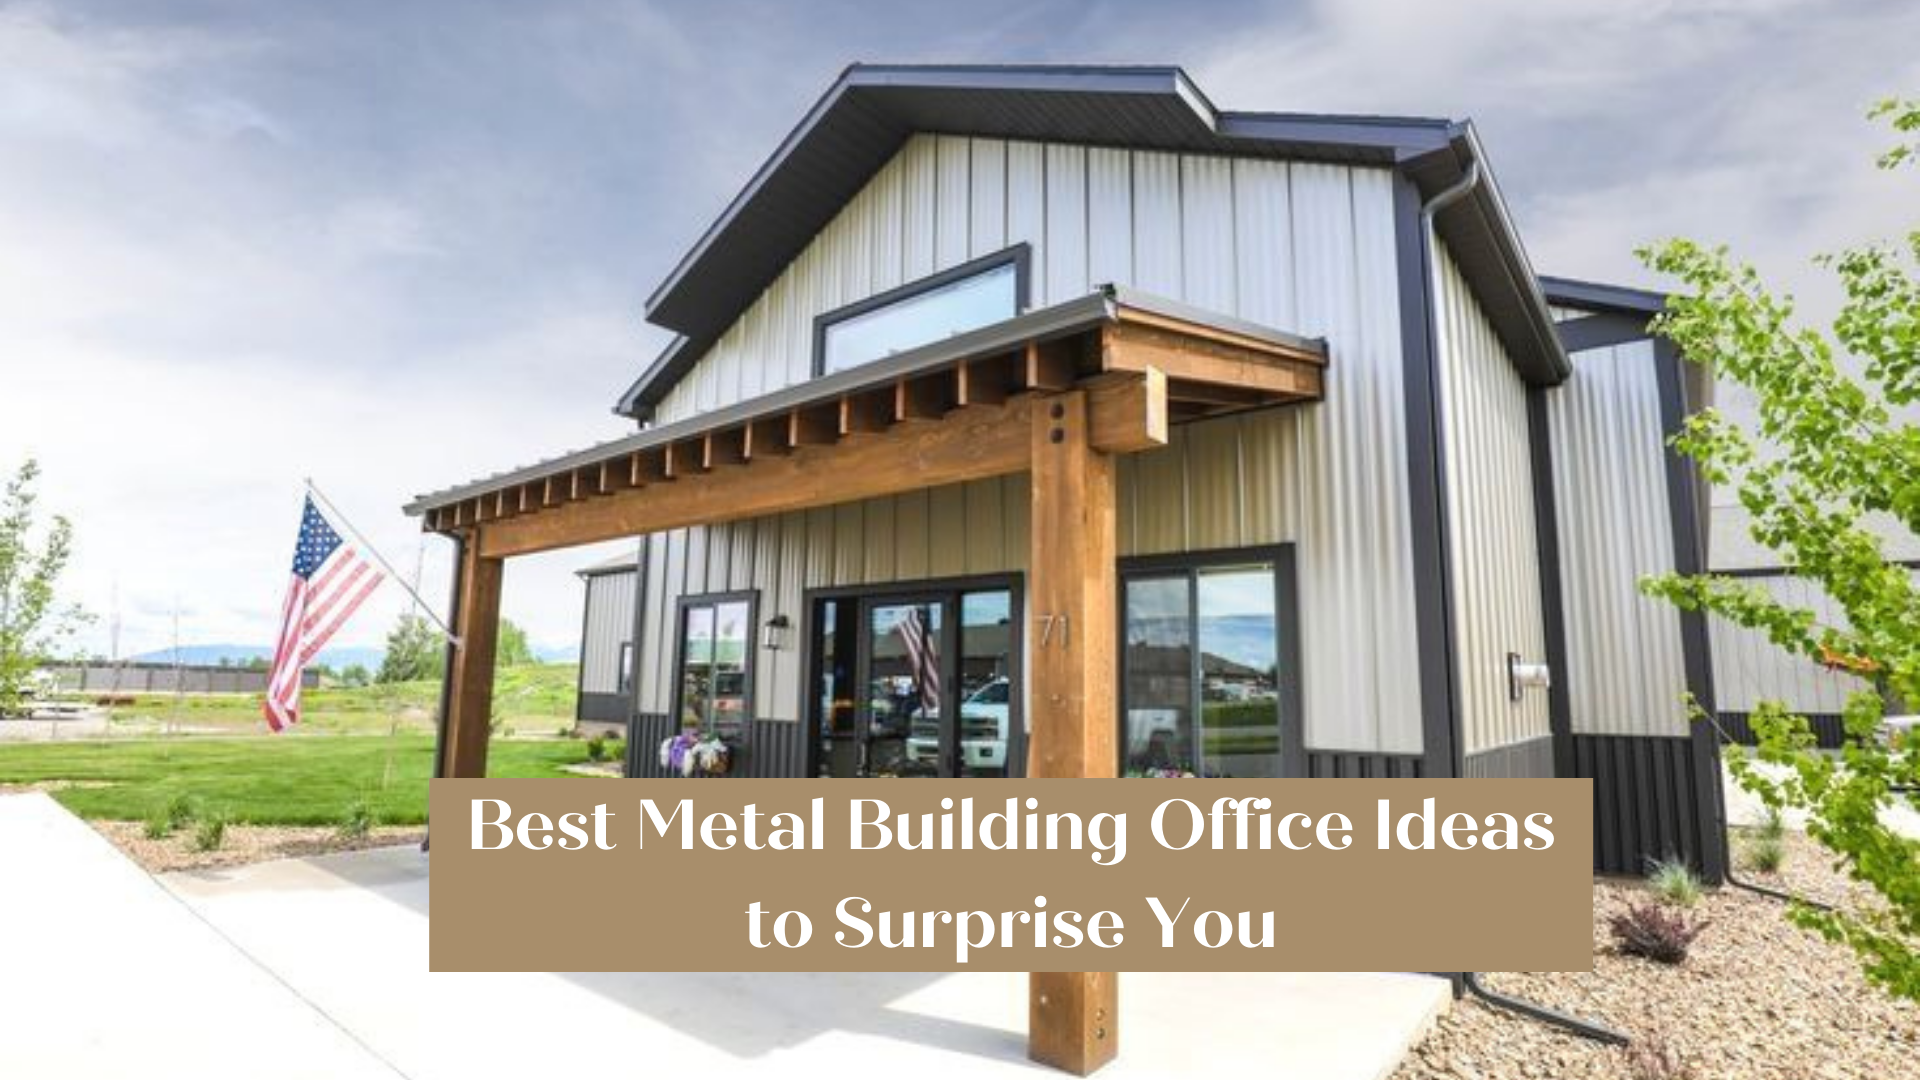 Best Metal Building Office Ideas to Surprise You